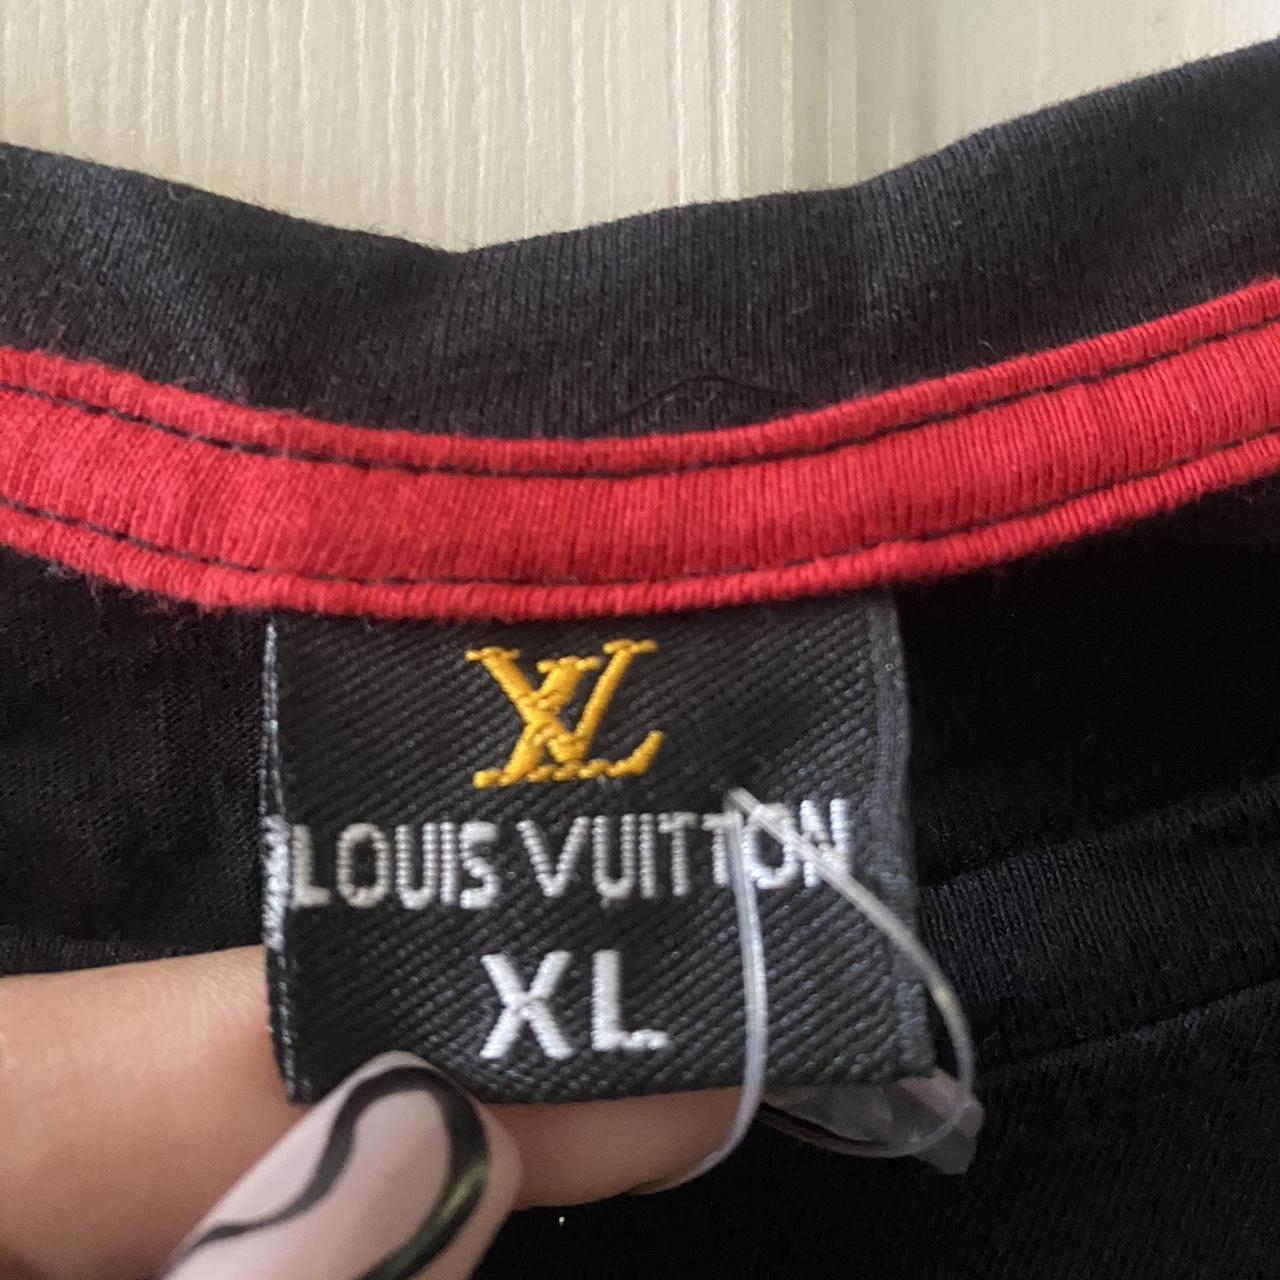 Louis Vuitton Bugs Bunny T Shirt on Sale, SAVE 59% 